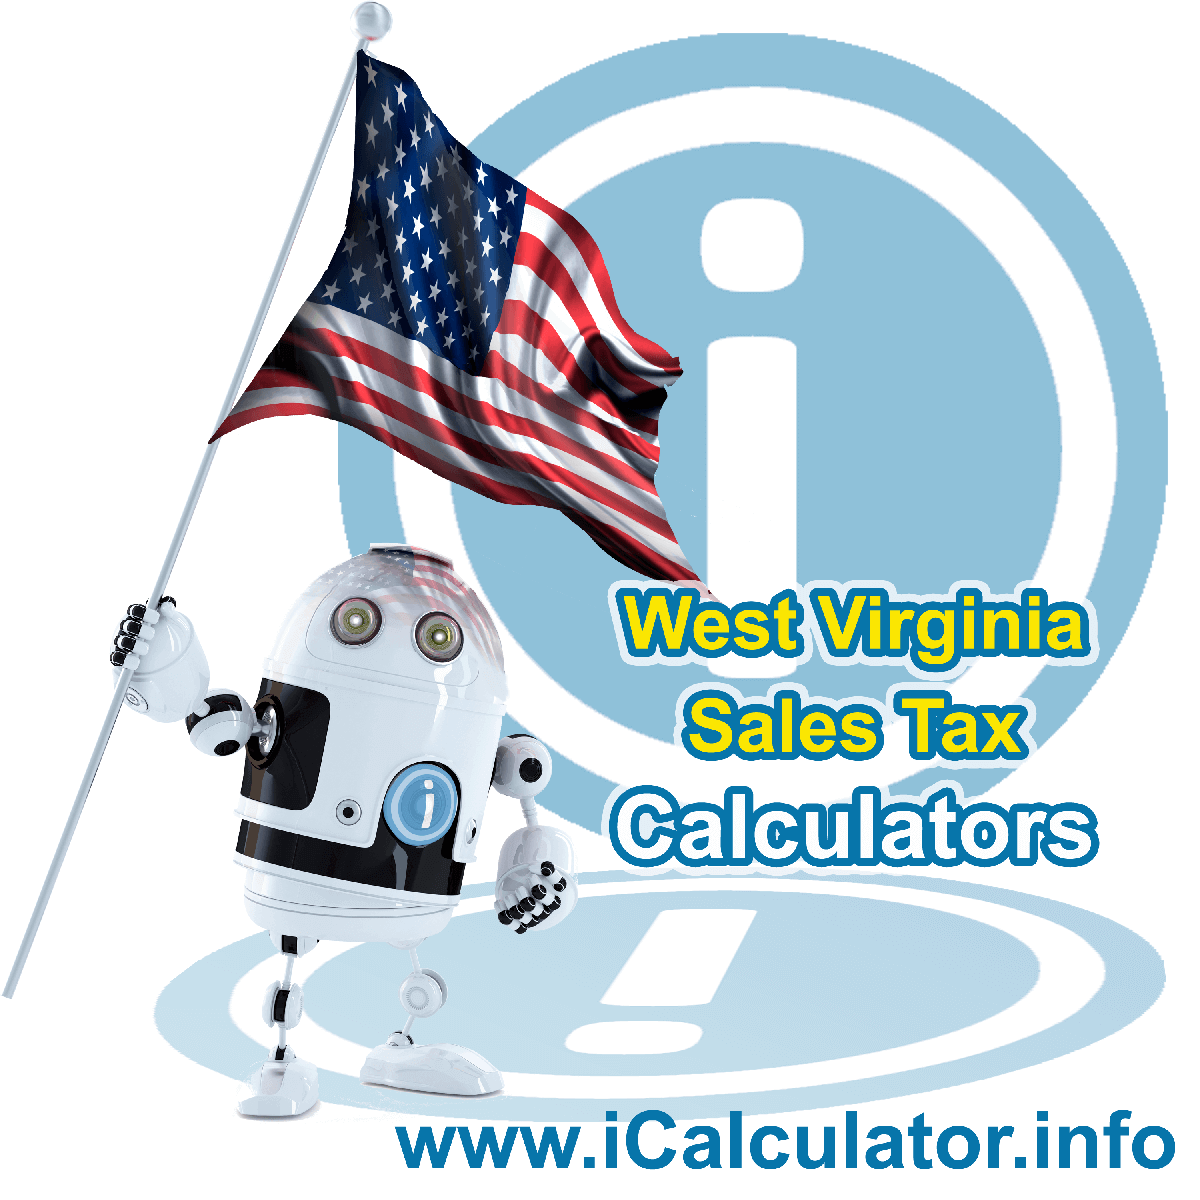 Weston, West Virginia Sales Tax Comparison Calculator: This image illustrates a calculator robot comparing sales tax in Weston, West Virginia manually using the Weston, West Virginia Sales Tax Formula. You can use this information to compare Sales Tax manually or use the Weston, West Virginia Sales Tax Comparison Calculator to calculate and compare Weston, West Virginia sales tax online.